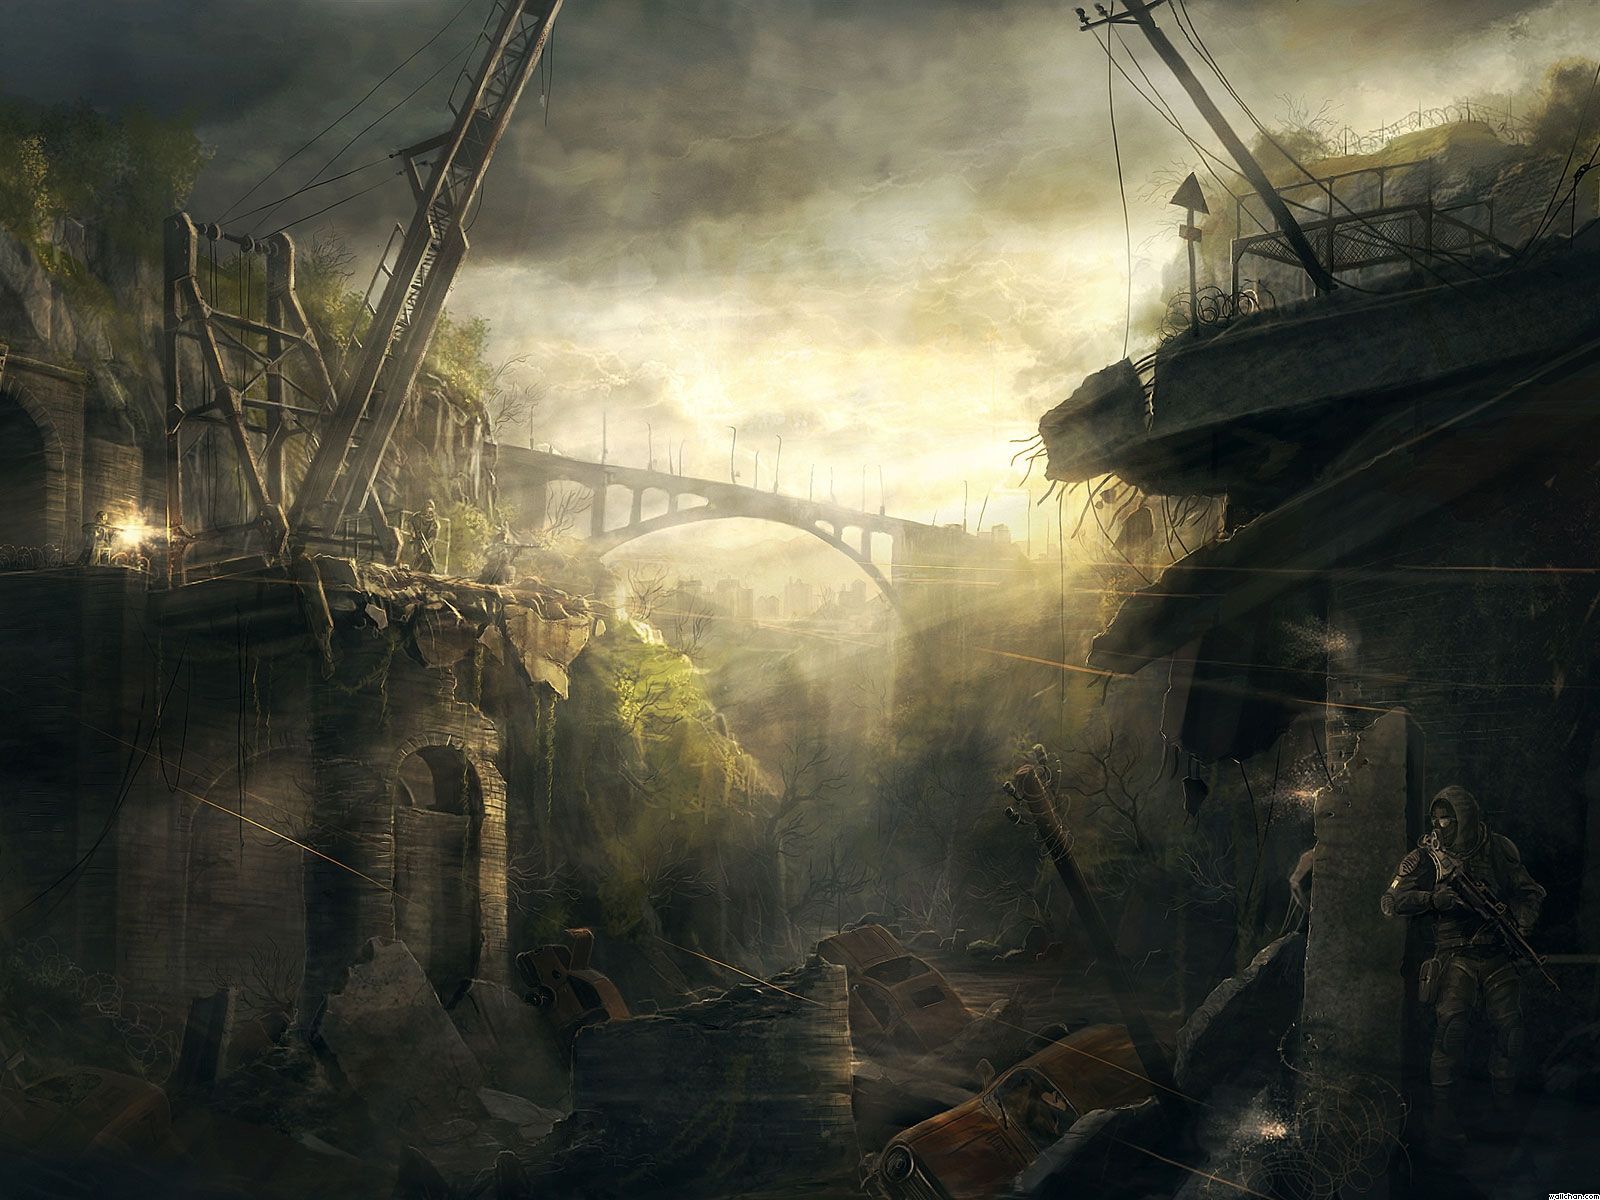 doomsday destruction Wallpaper: end of the world. Post apocalyptic city, Post apocalyptic, Concept art